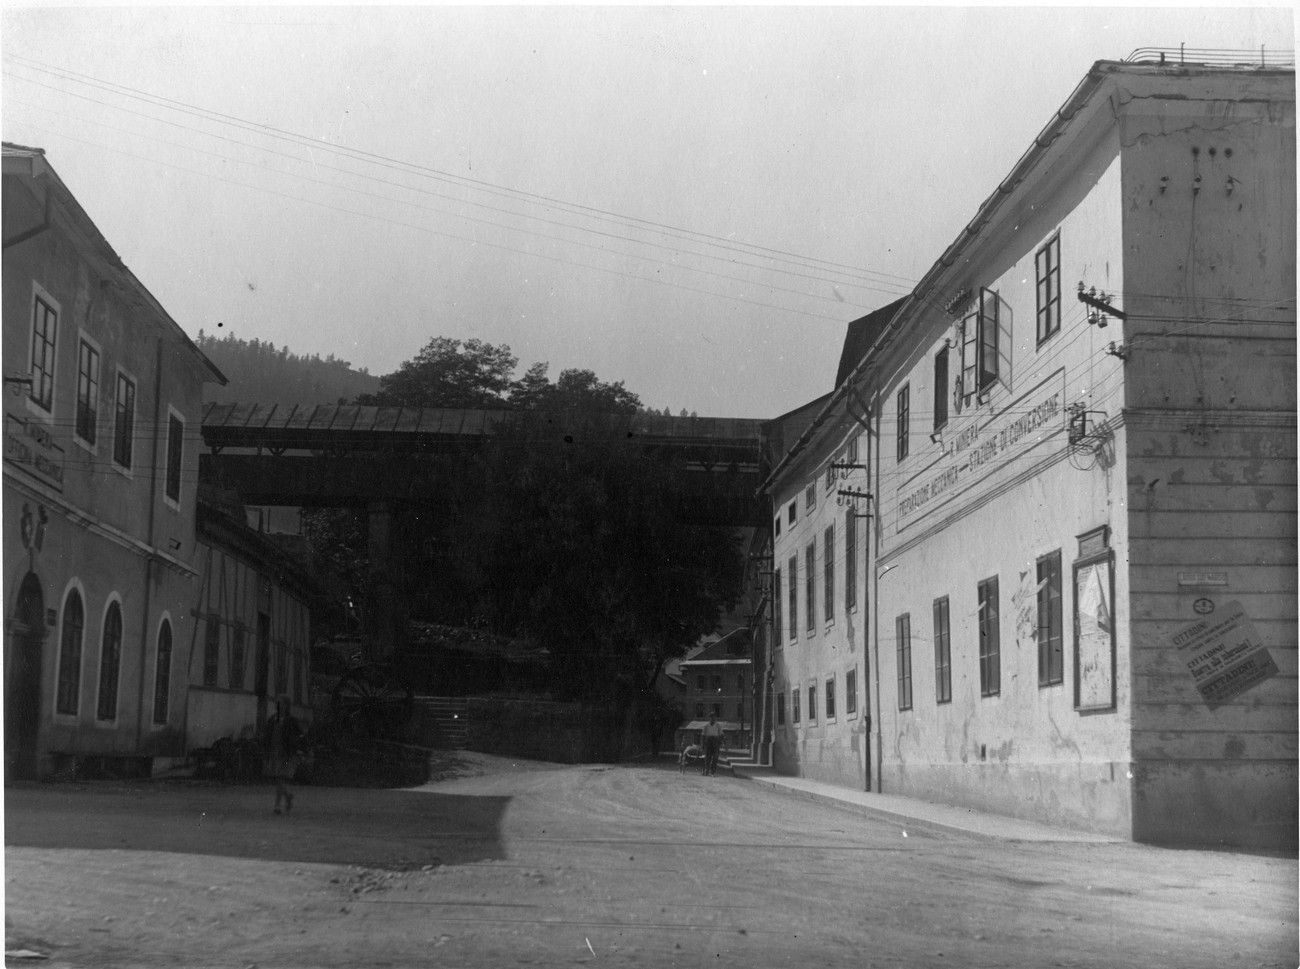 The mercury mine was vitally important for Idrija even during the Italian period. All the way up until the capitulation of Italy, the mine managed to maintain a relatively high level of production (up to 14,600 flasks per year). War conditions interrupted the mine's planned modernisation in 1941. In the photograph, we can see the mine's picking plant building from the time before the company was sold in 1940 to the private company Monte Amiata from Tuscany. Idrija Municipal Museum.